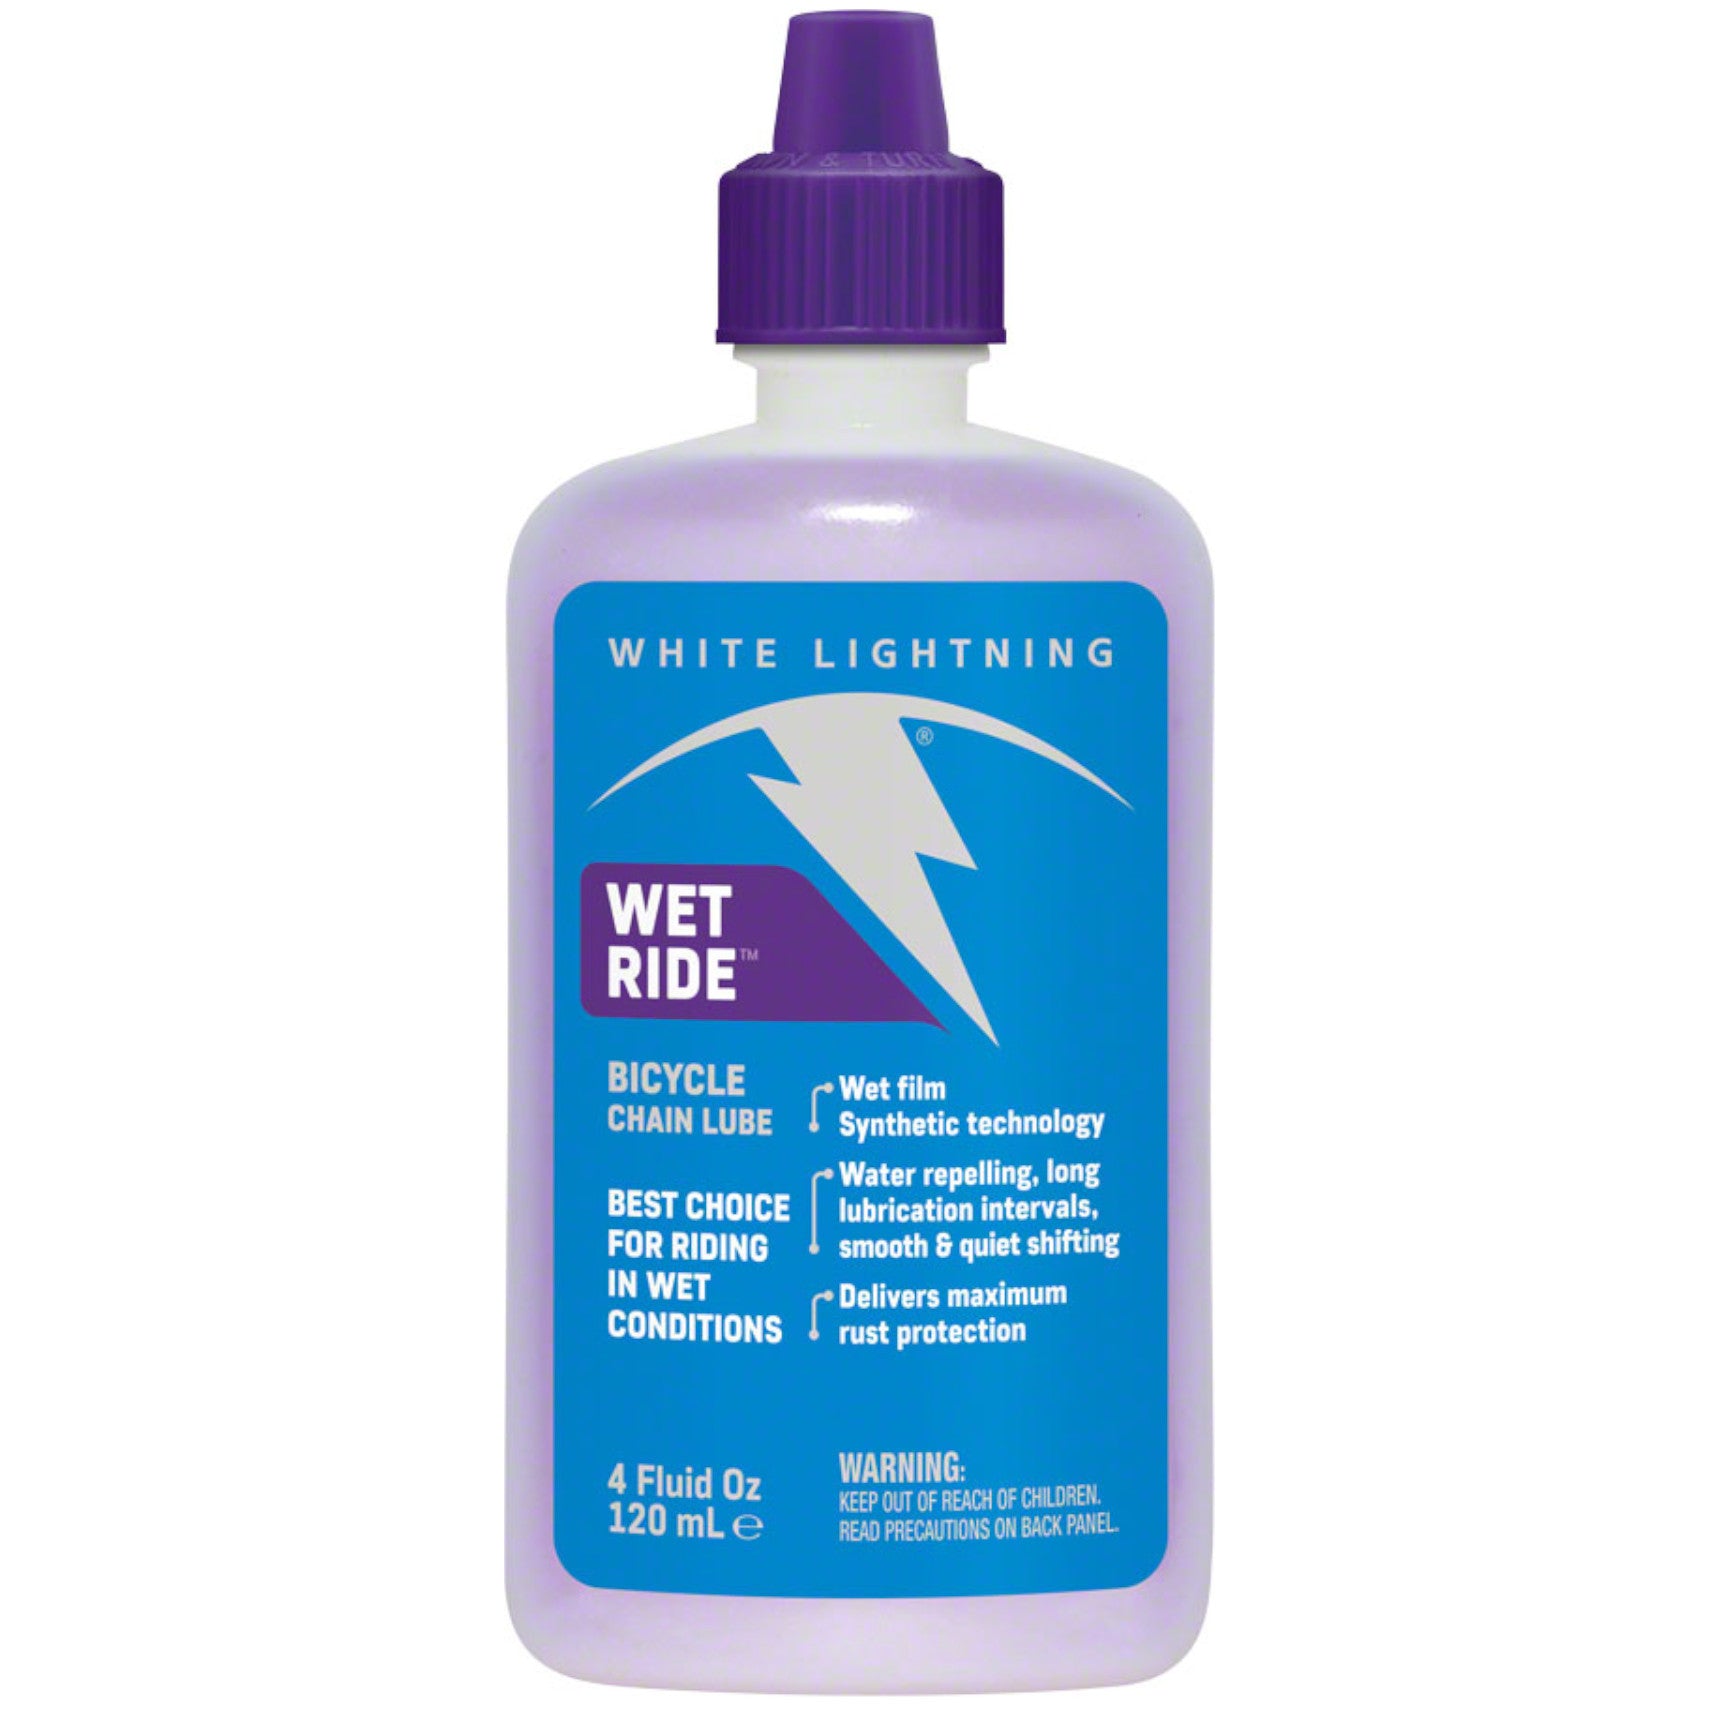 White Lightning 4-oz. Wet Ride Extreme Conditions Chain Lube